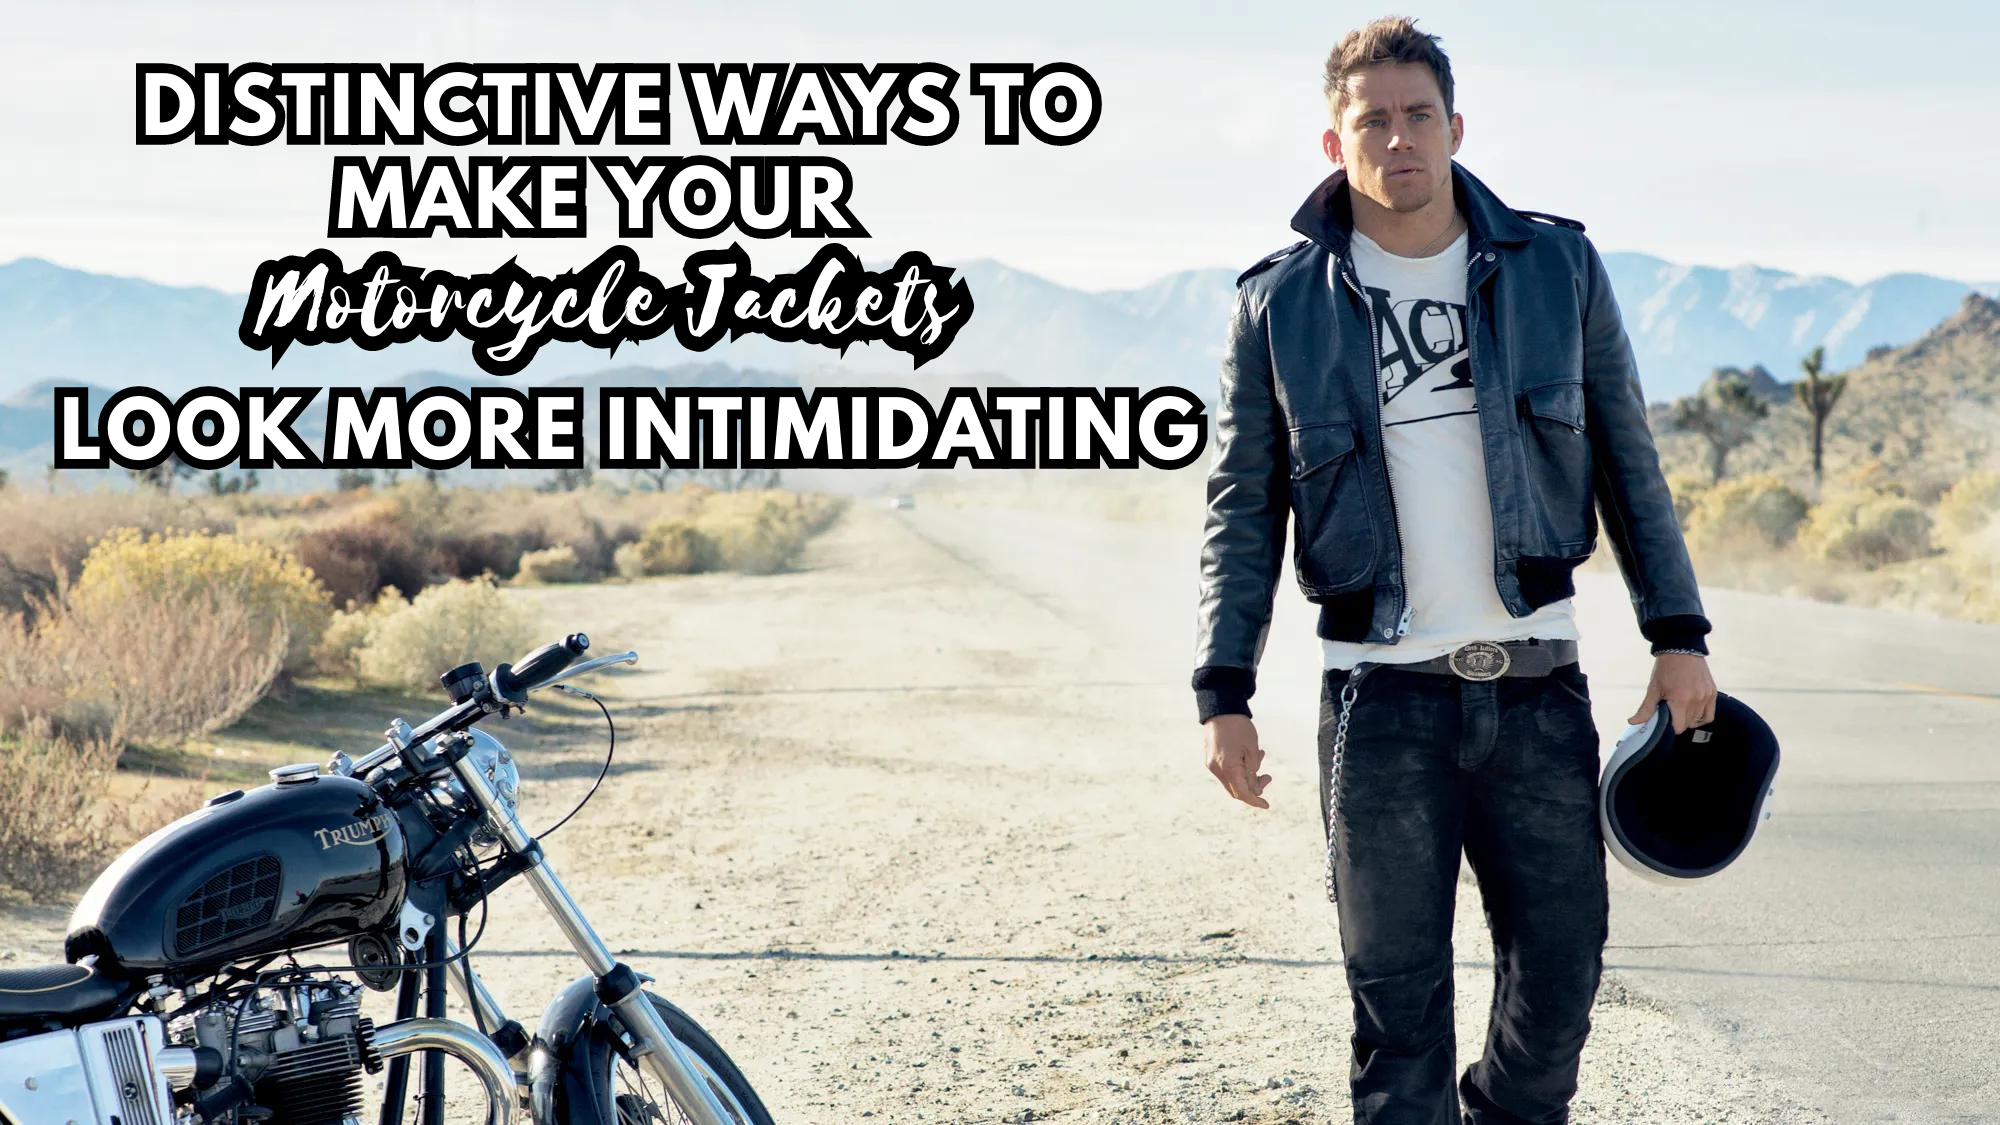 Distinctive Ways to Make Your Motorcycle Jackets Look More Intimidating